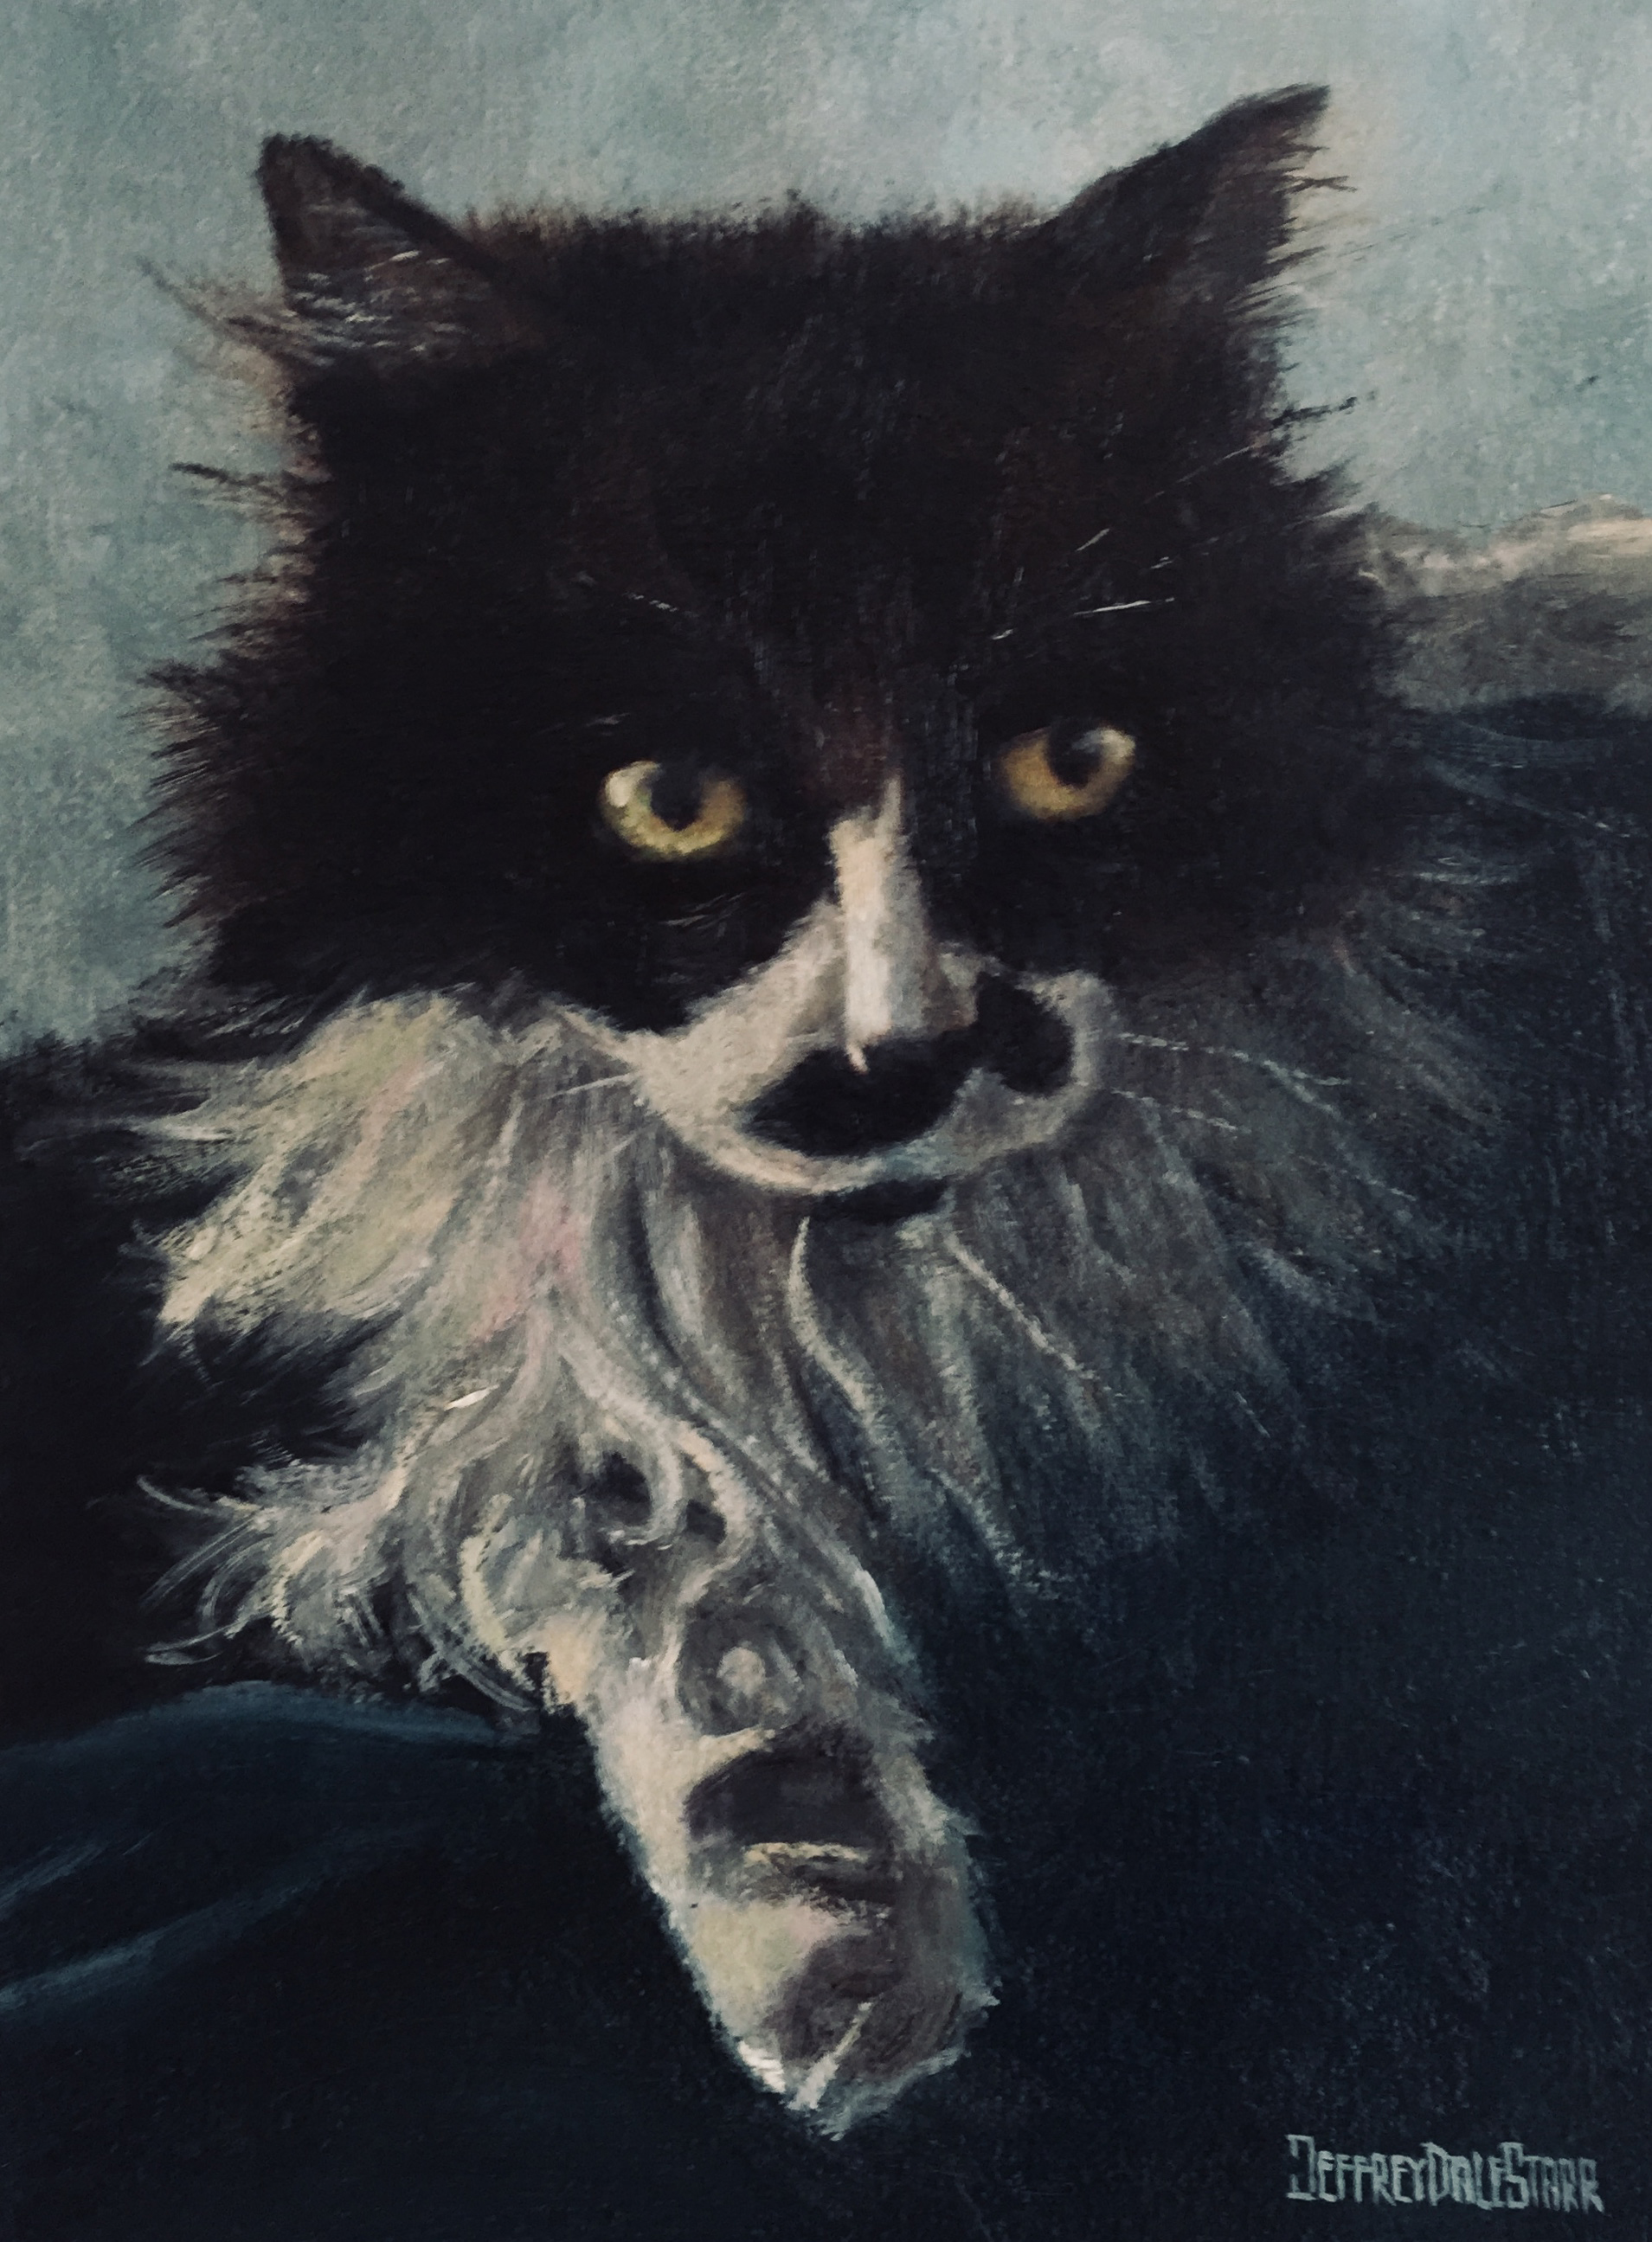 The Kitty with the Fish Mustache by Jeffrey Dale Starr